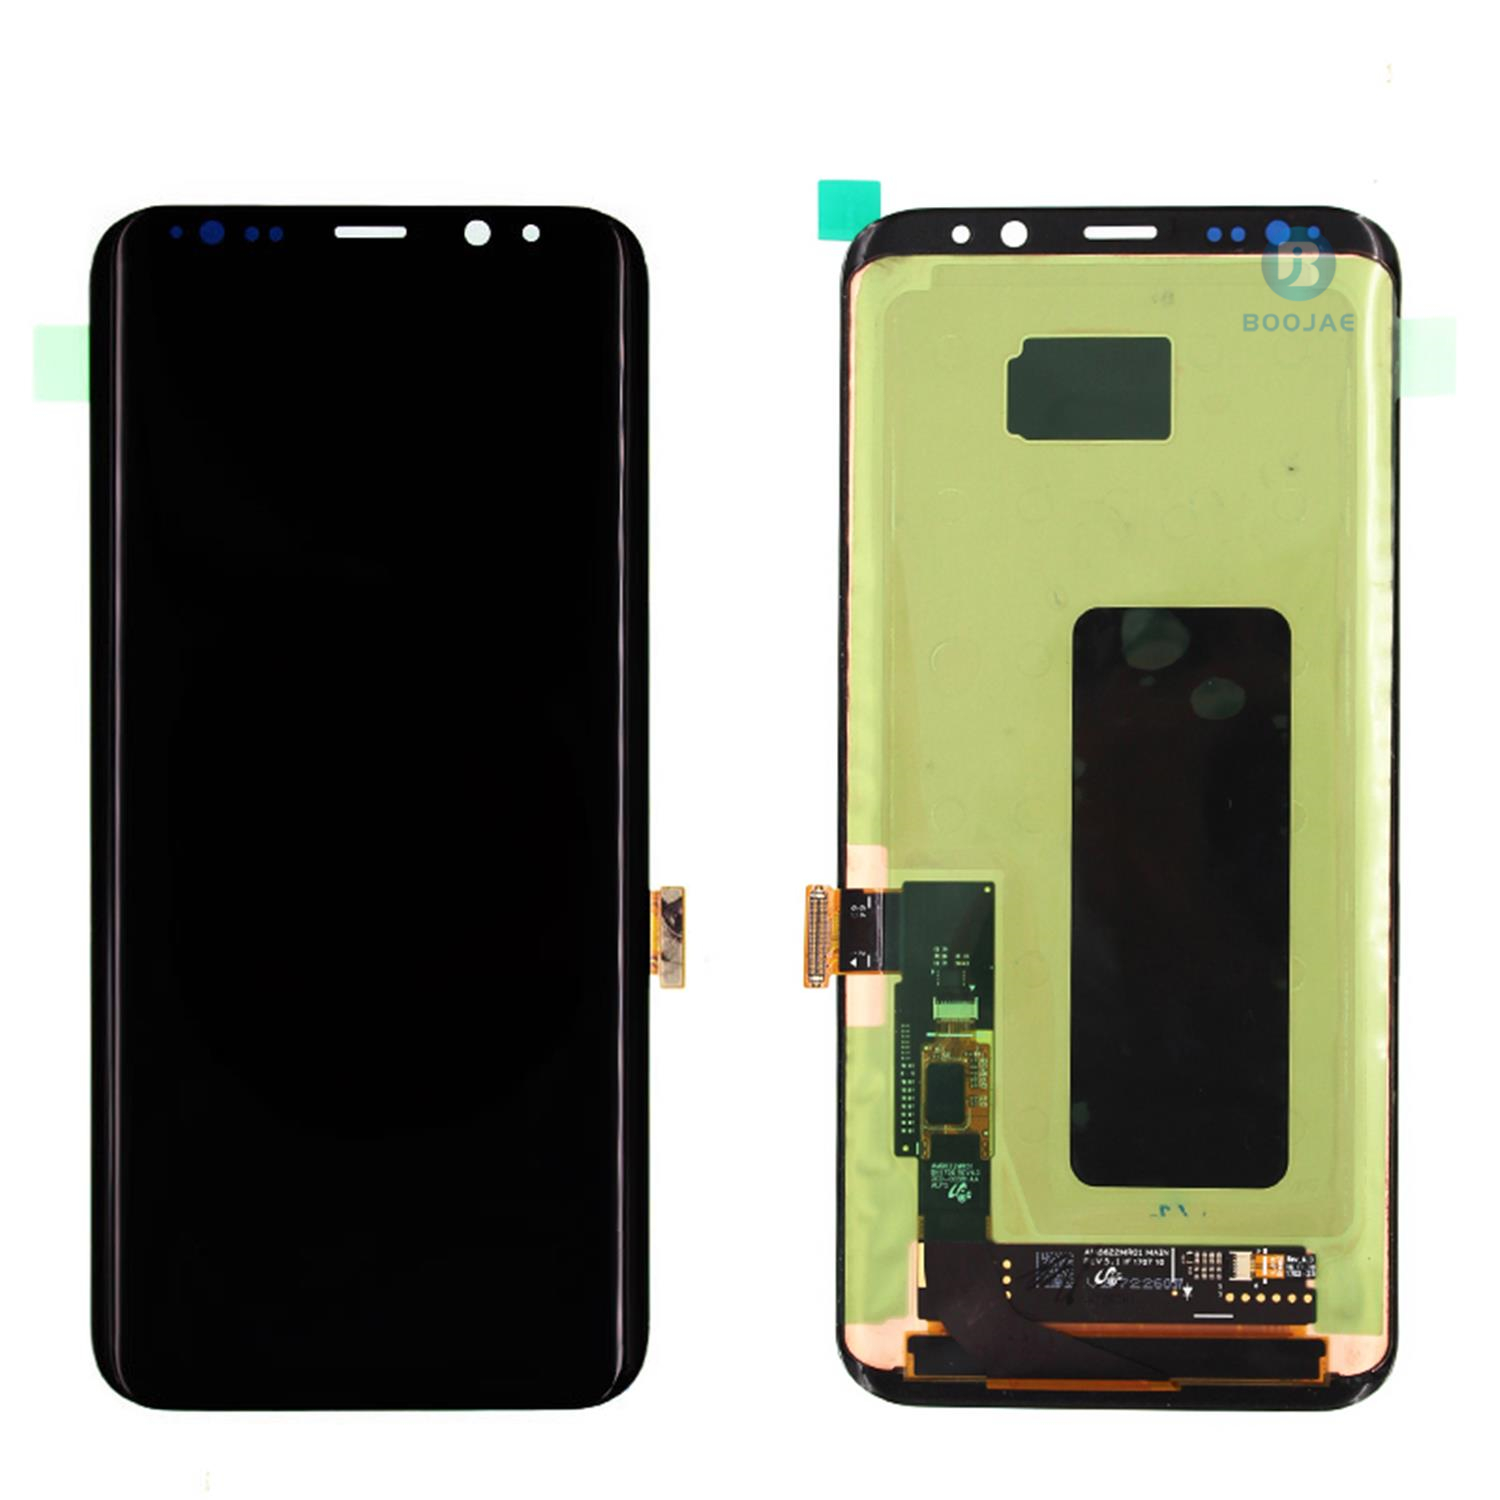 Samsung Galaxy S8 Plus LCD Screen Display and Touch Panel Digitizer Assembly Replacement